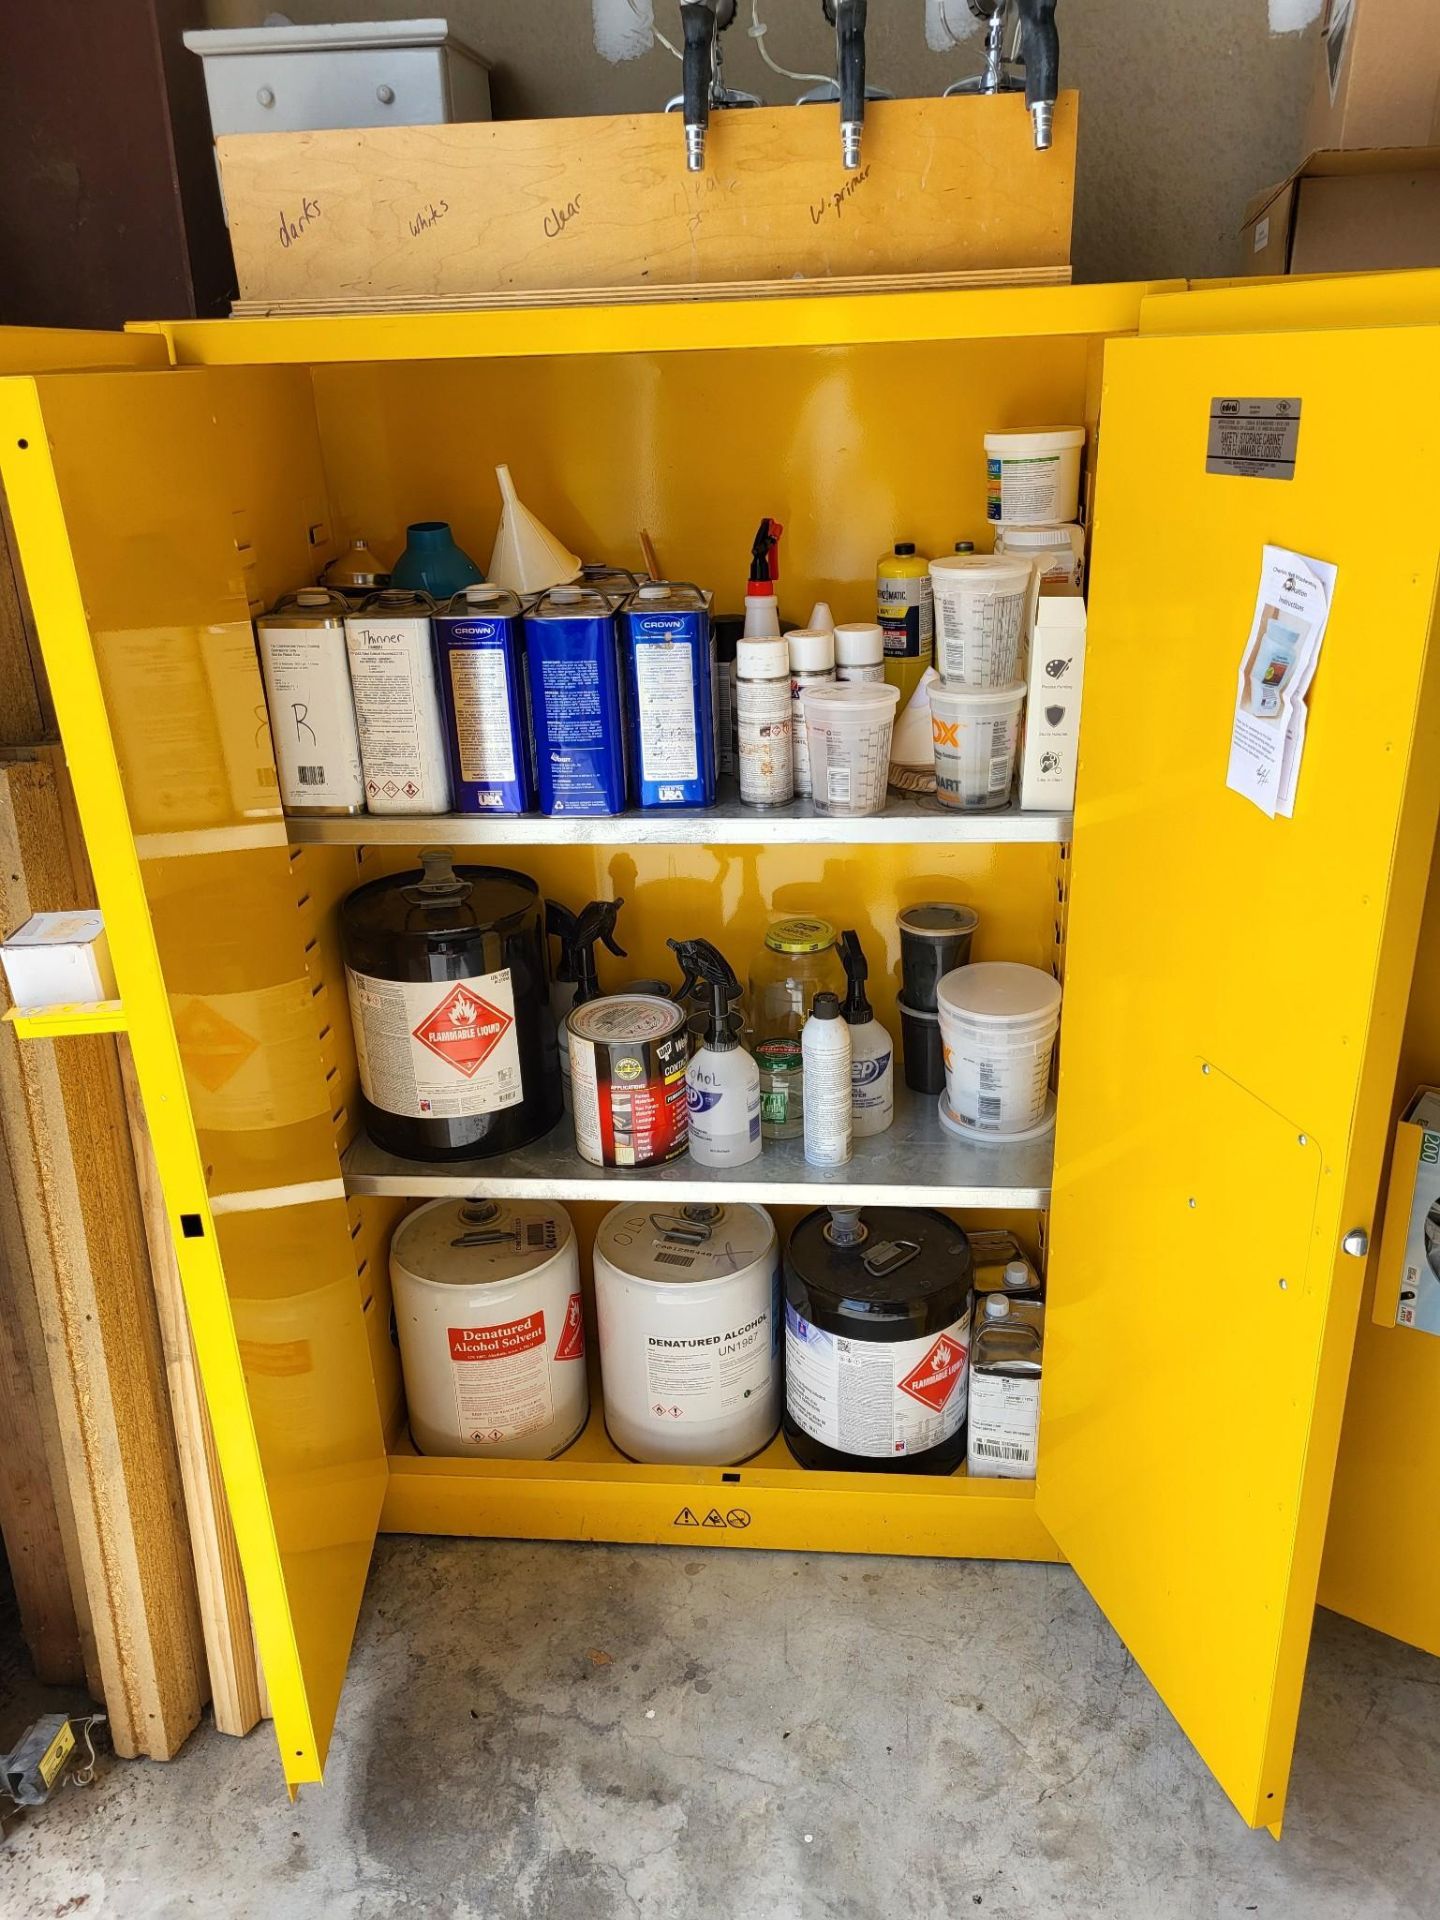 (2) EDSAL YELLOW METAL FIRE SAFE STORAGE CABINETS (CAN HOLD CLASS 3 LIQUIDS) - Image 4 of 5